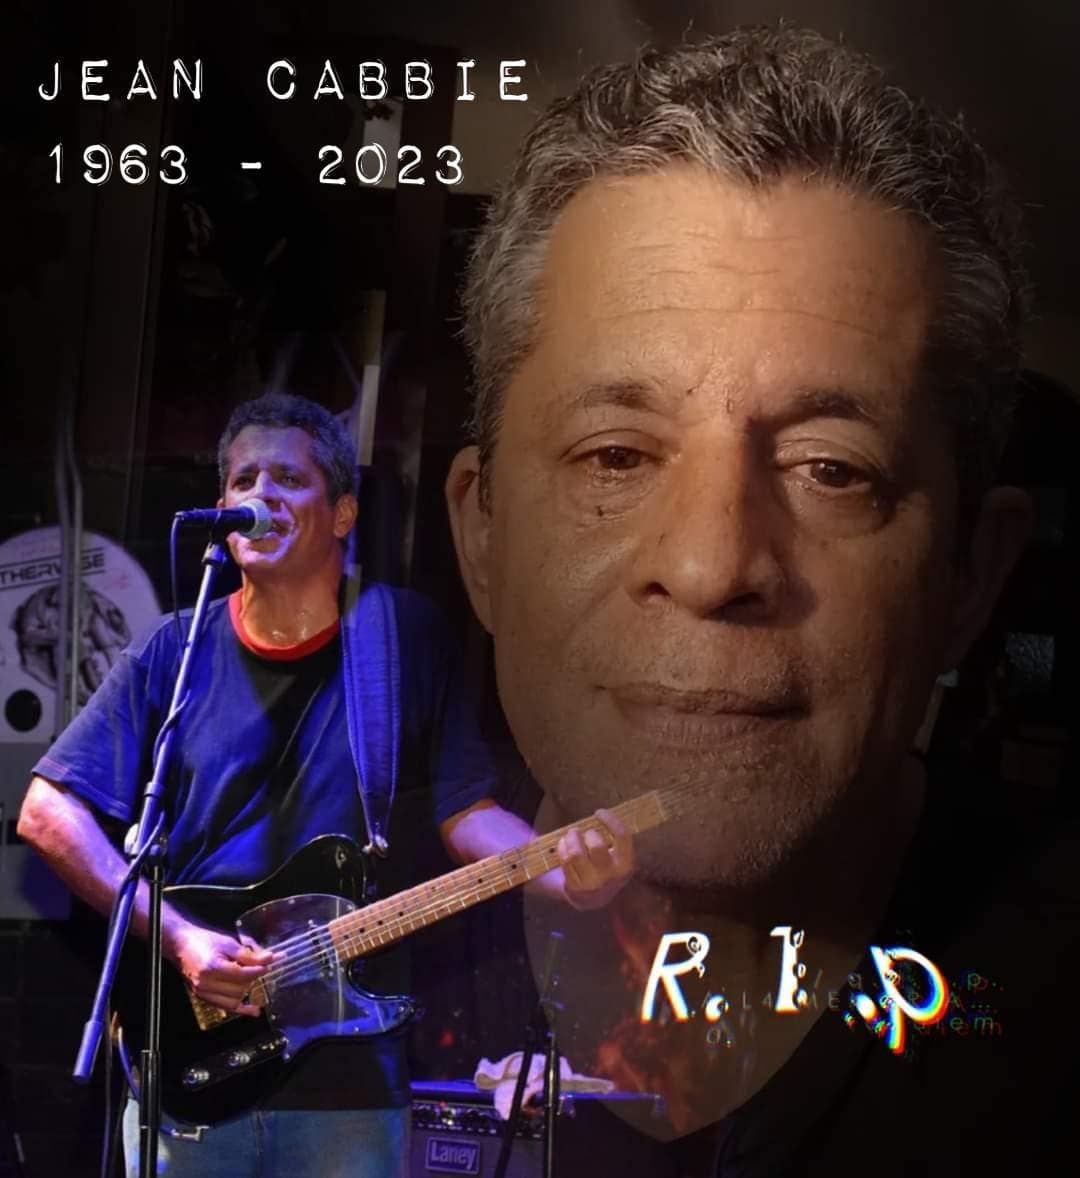 JEAN CABBIE memory on Museboat LIve